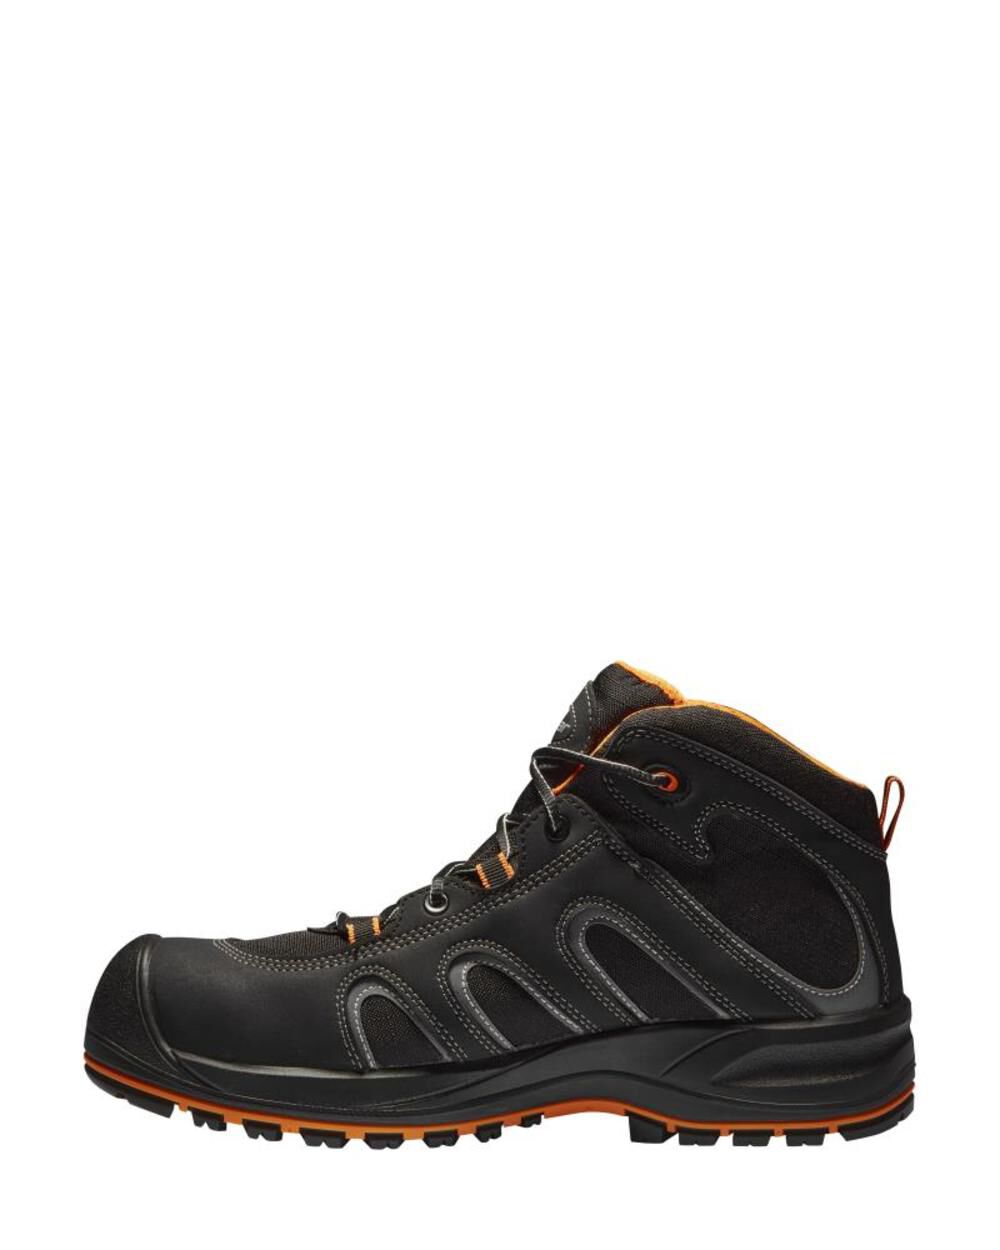 Gear Safety Shoes Falcon Size 11 1/2 SGUS73002115